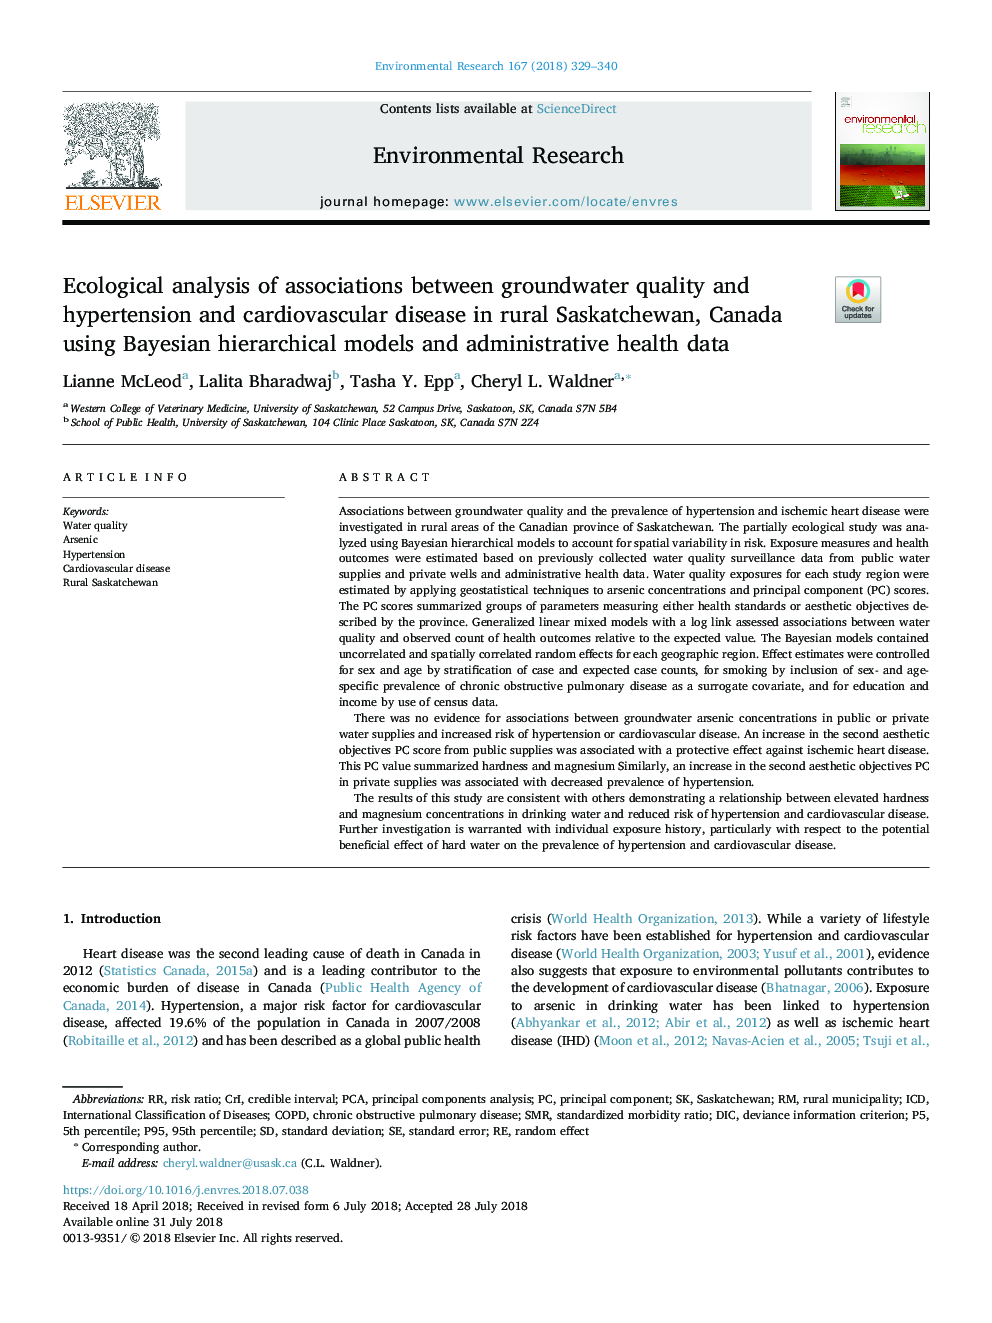 Ecological analysis of associations between groundwater quality and hypertension and cardiovascular disease in rural Saskatchewan, Canada using Bayesian hierarchical models and administrative health data